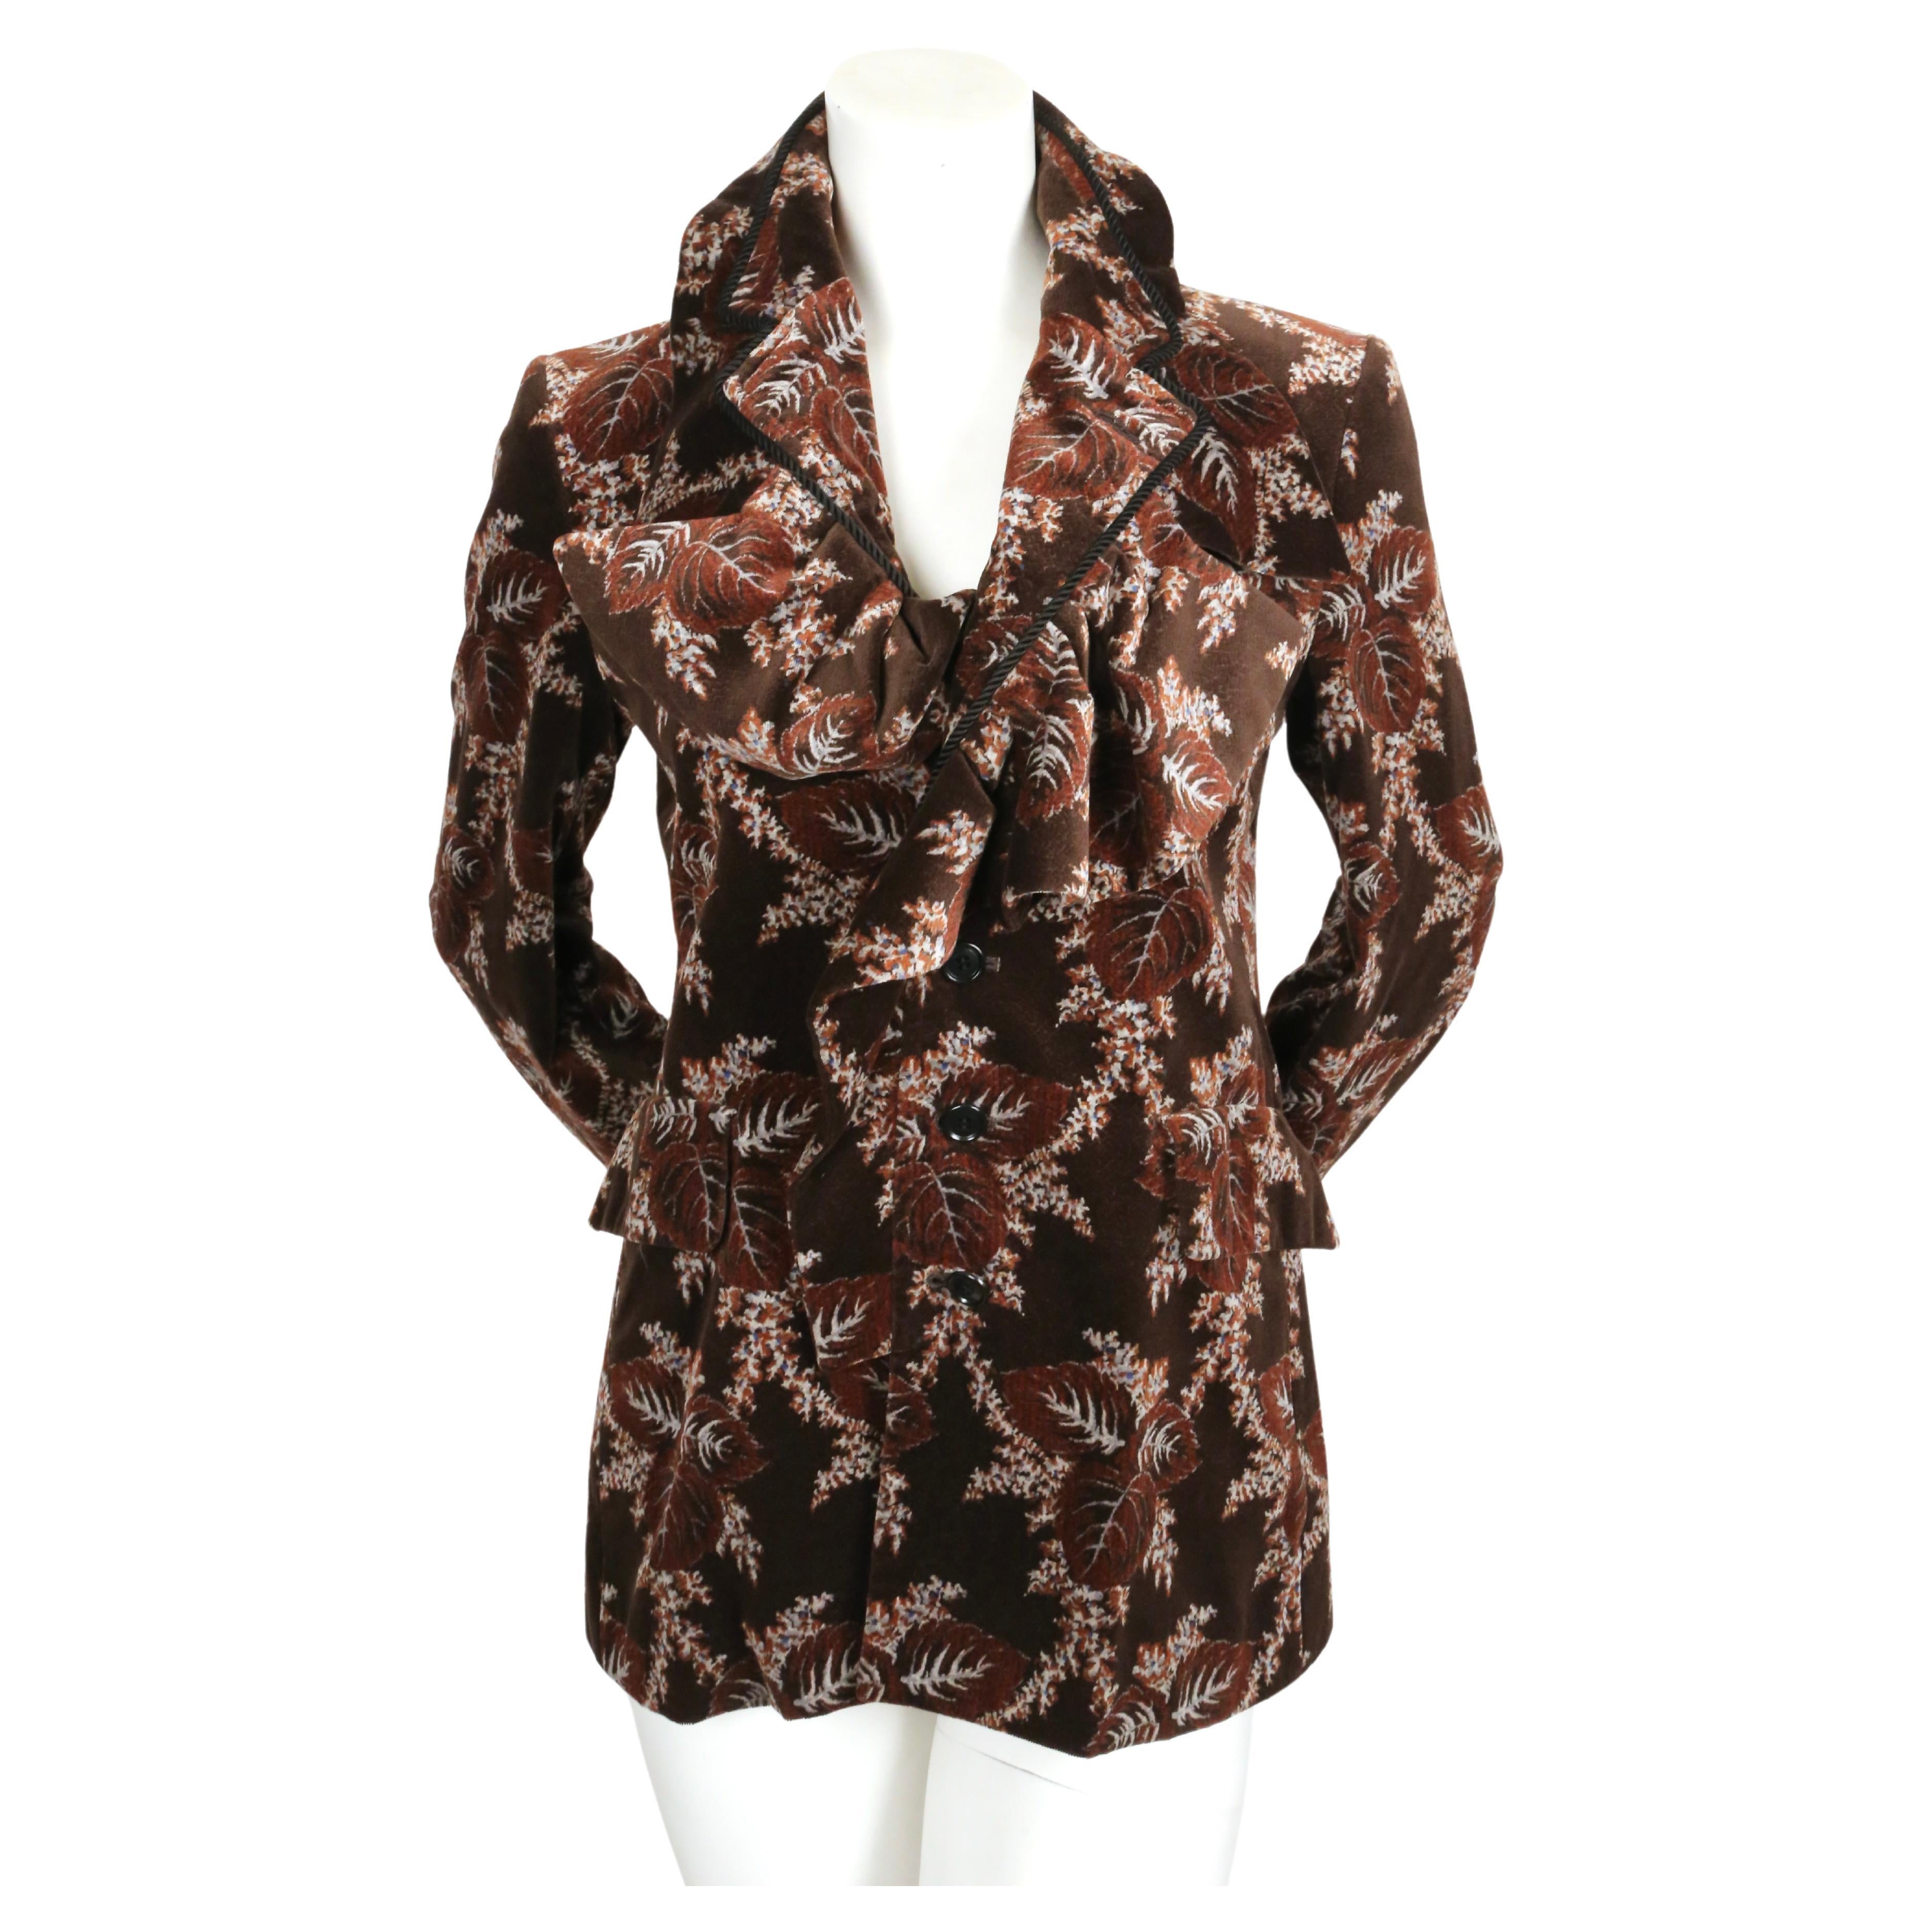 Beautiful floral velvet jacket with ruffled neckline designed by Rei Kawakubo for Comme Des Garcons dating to fall of 2001. This listing is for the jacket only however the matching skirt is available for sale. Size 'S'. Jacket measures